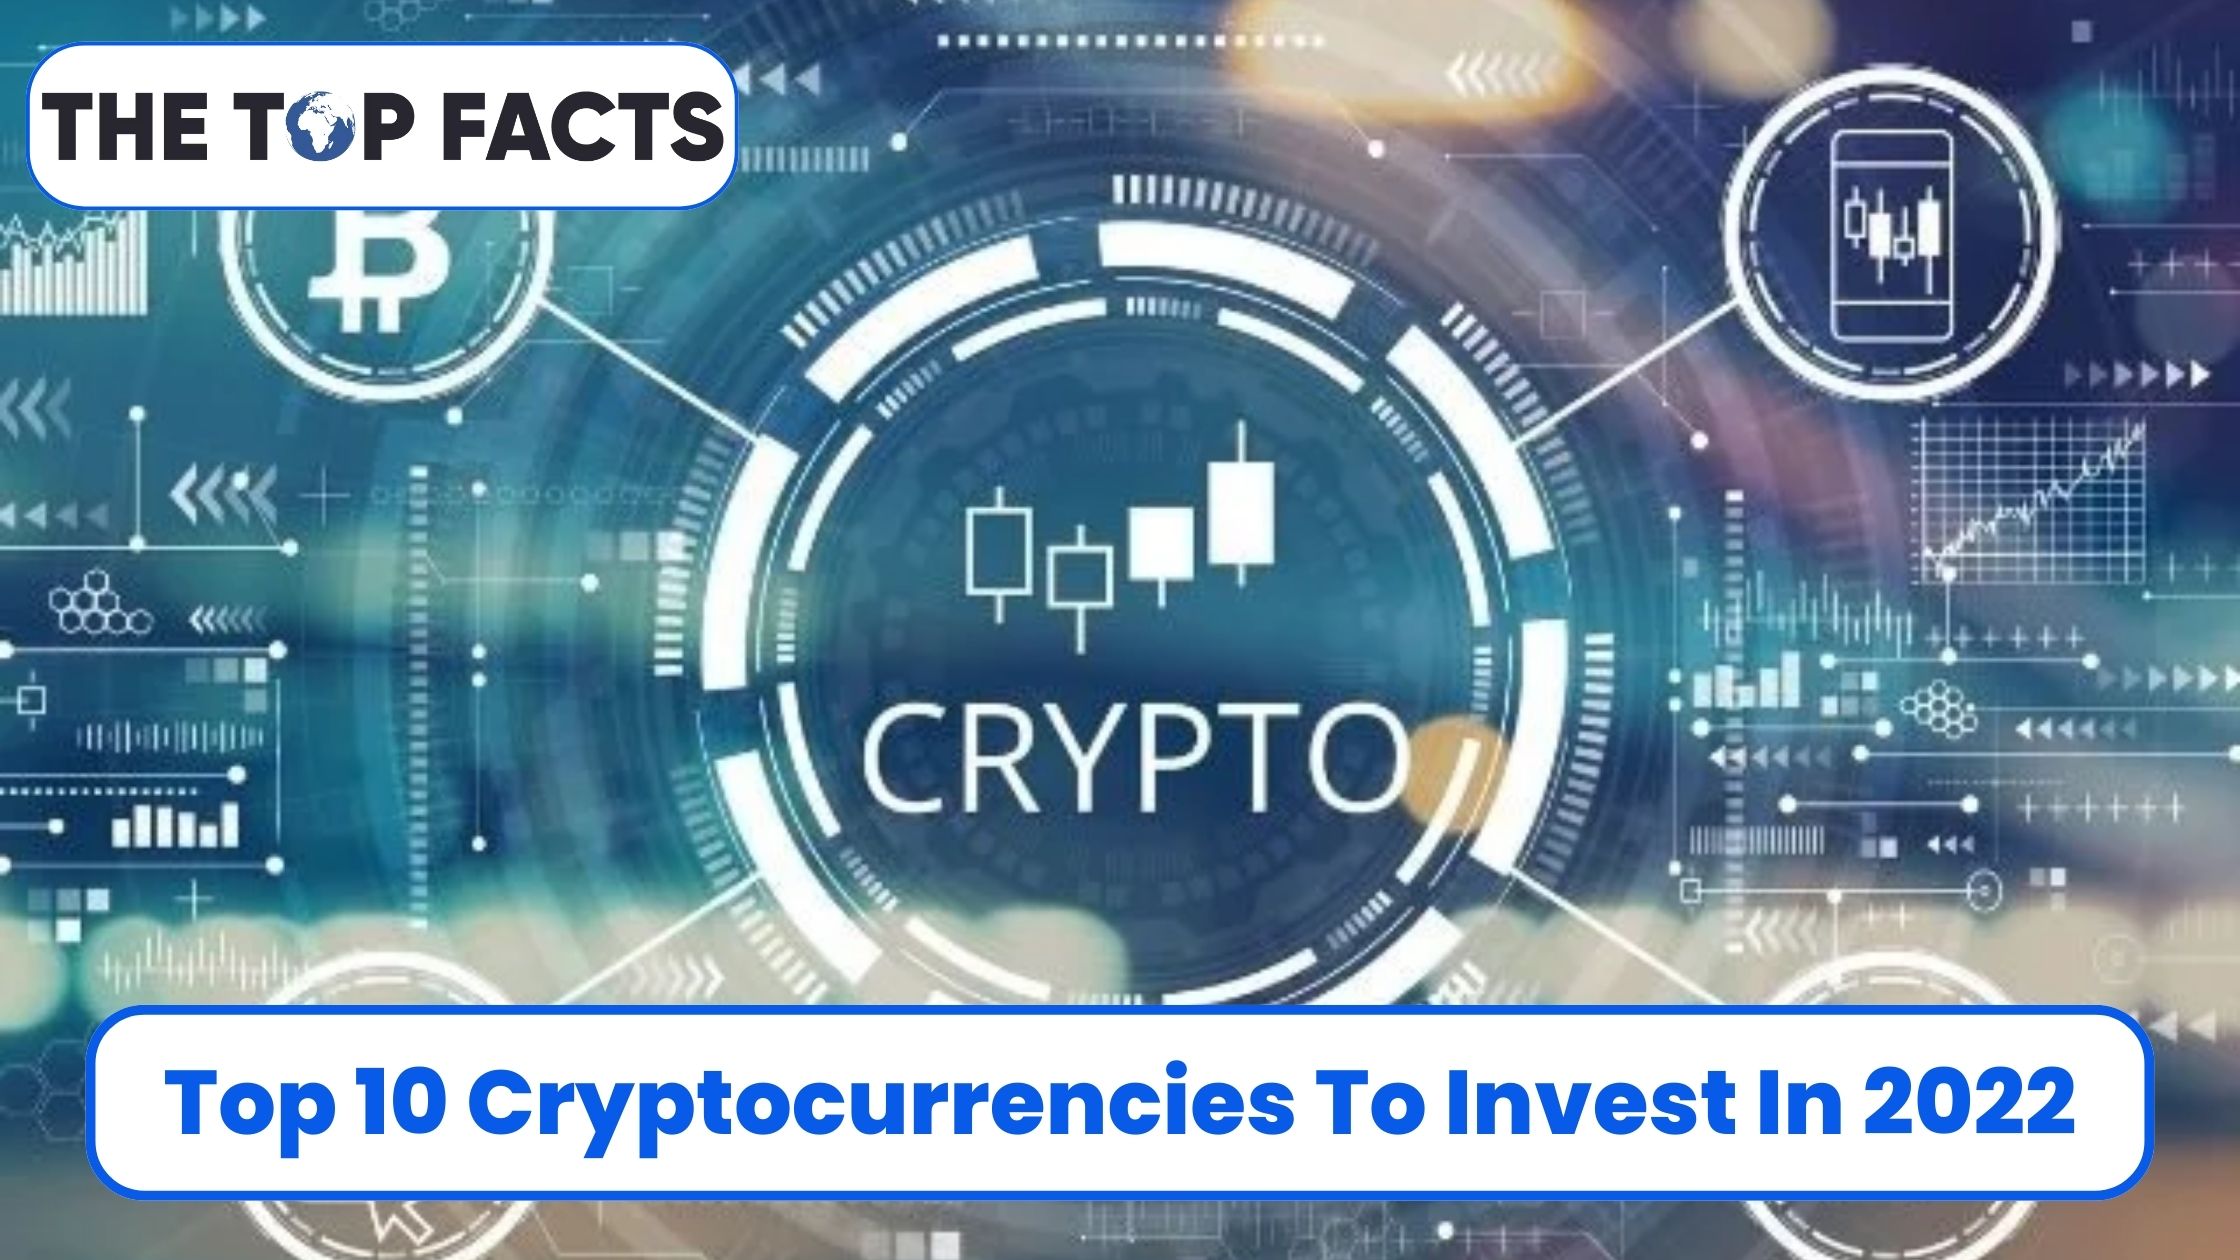 Top 10 Cryptocurrencies To Invest In 2022